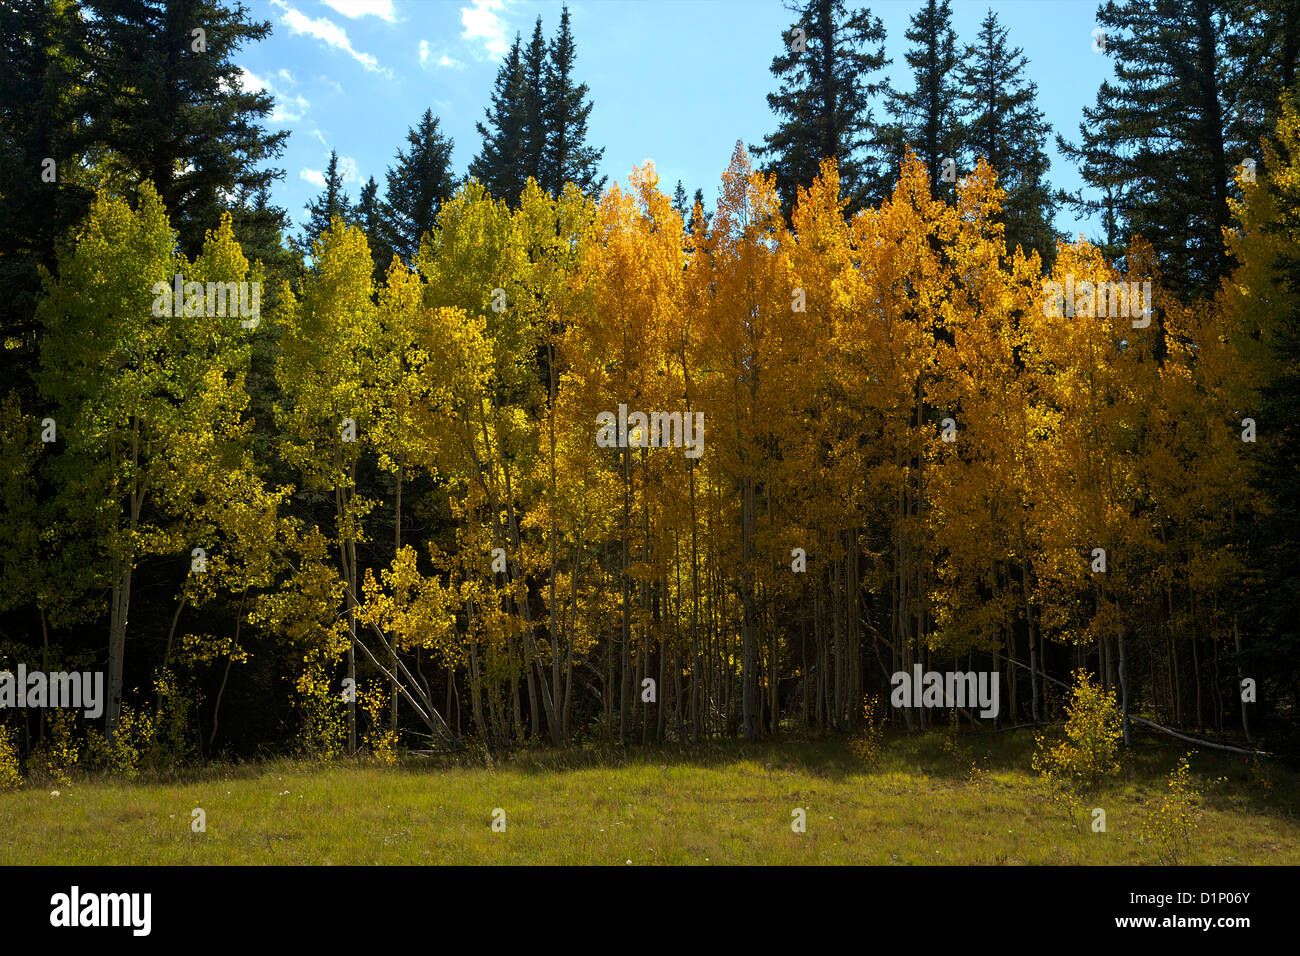 Aspen trees and Lodgepole Pines in fall, Kaibab National Forest, Grand Canyon National Park, Arizona, USA Stock Photo